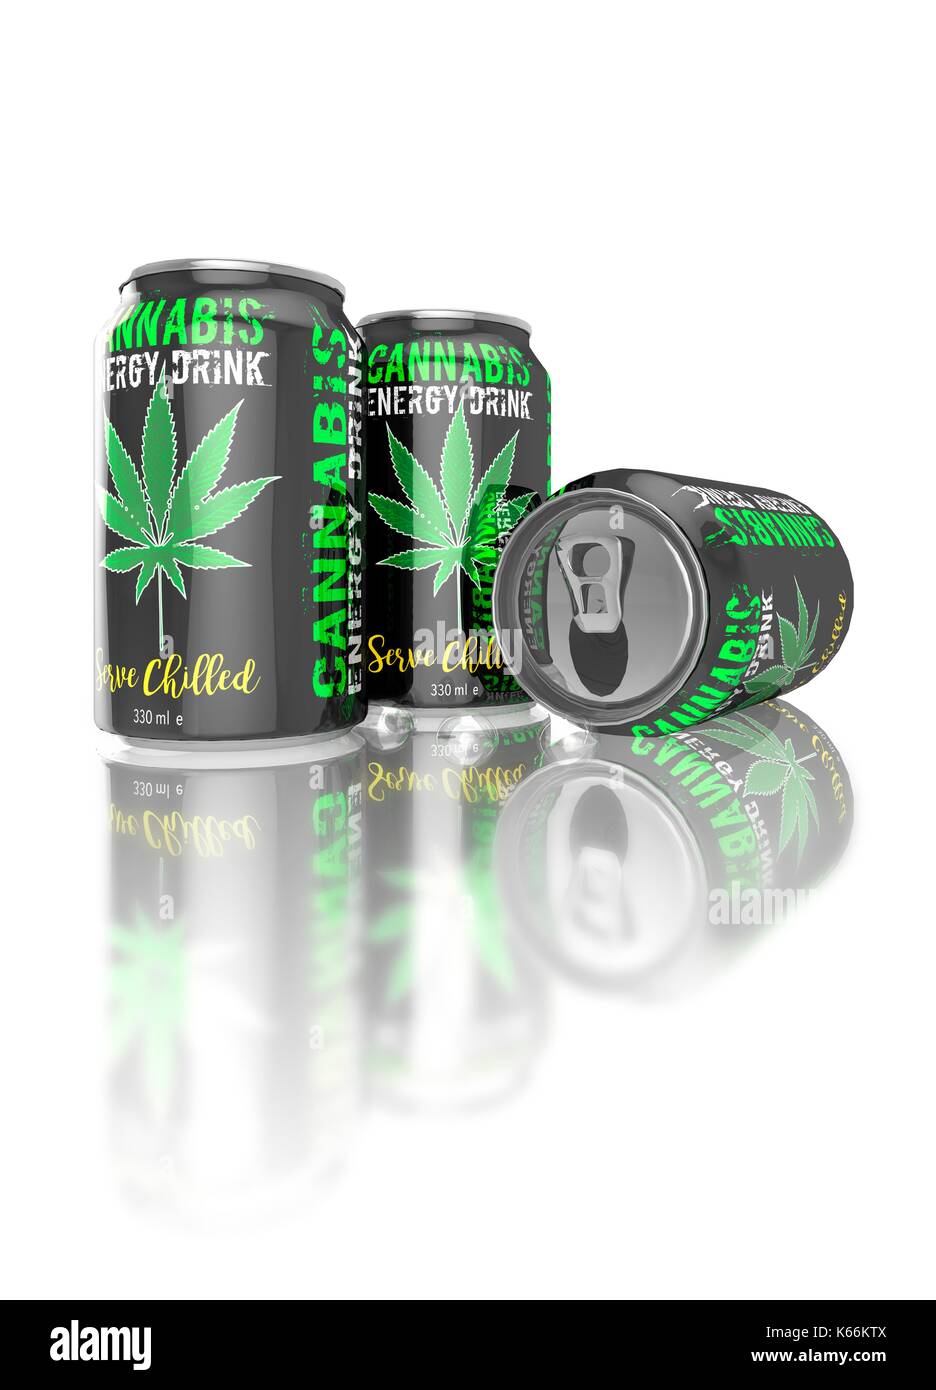 Cannabis energy drinks cans, illustration. Stock Photo